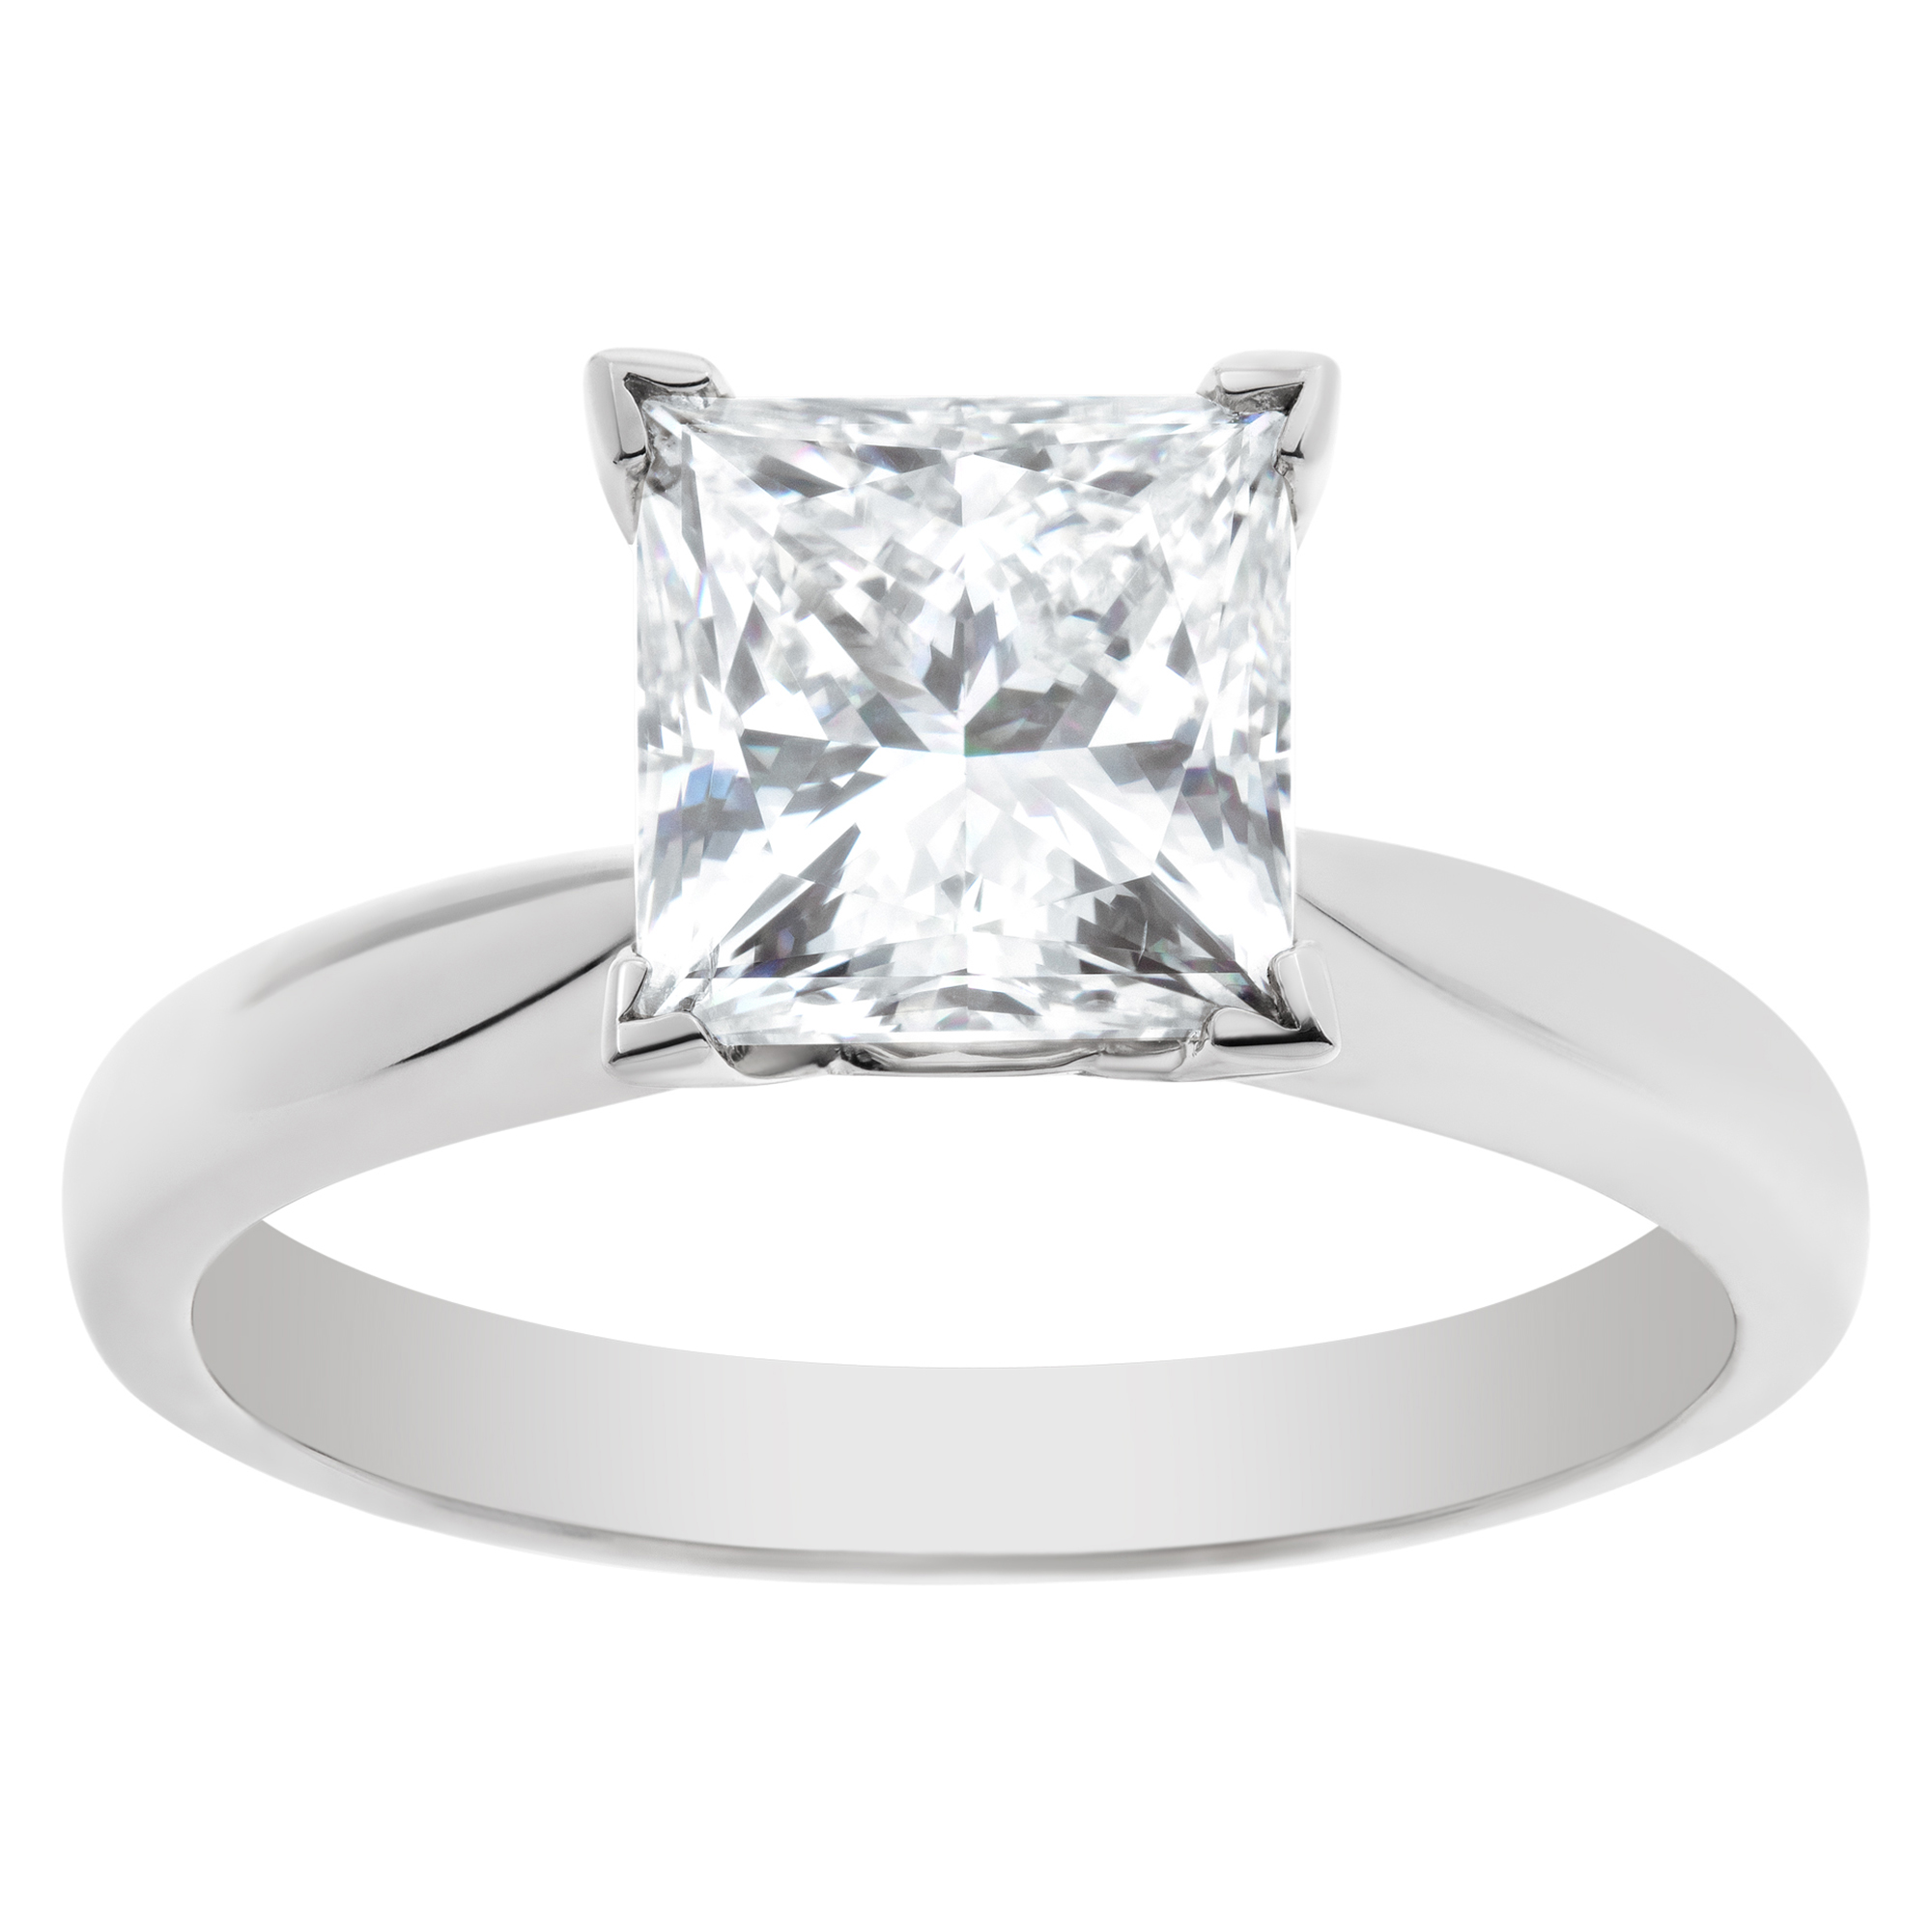 GIA certified princess cut diamond 2.09 carat (J color, SI1 clarity) solitaire ring image 1